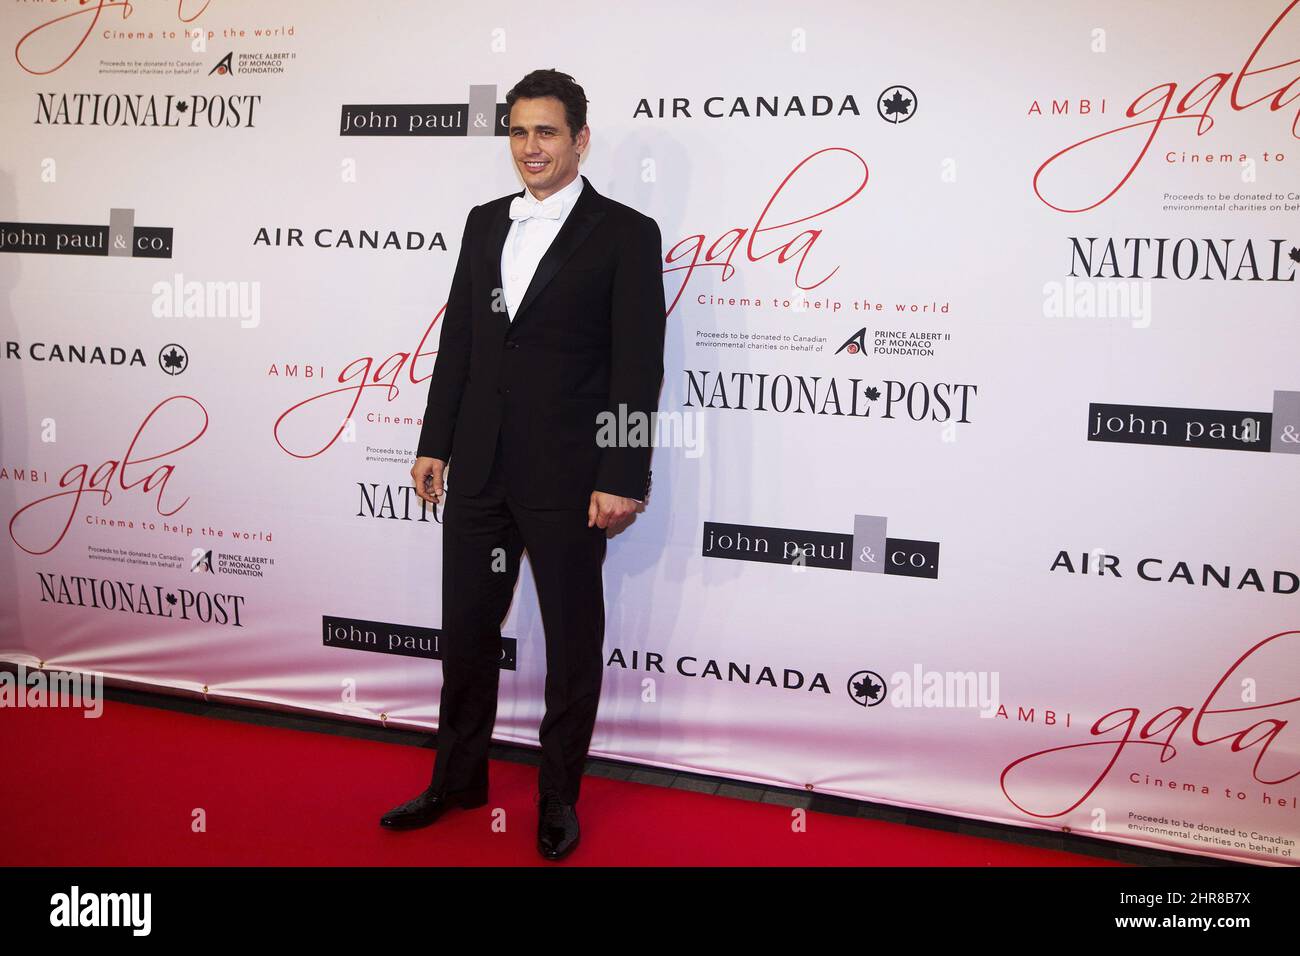 Actor James Franco on the red carpet for the AMBI Benefit Gala/Cinema to Help The World event in Support of The Prince Albert II of Monaco Foundation in Toronto on Wednesday, September 9, 2015. THE CANADIAN PRESS/Michelle Siu Stock Photo